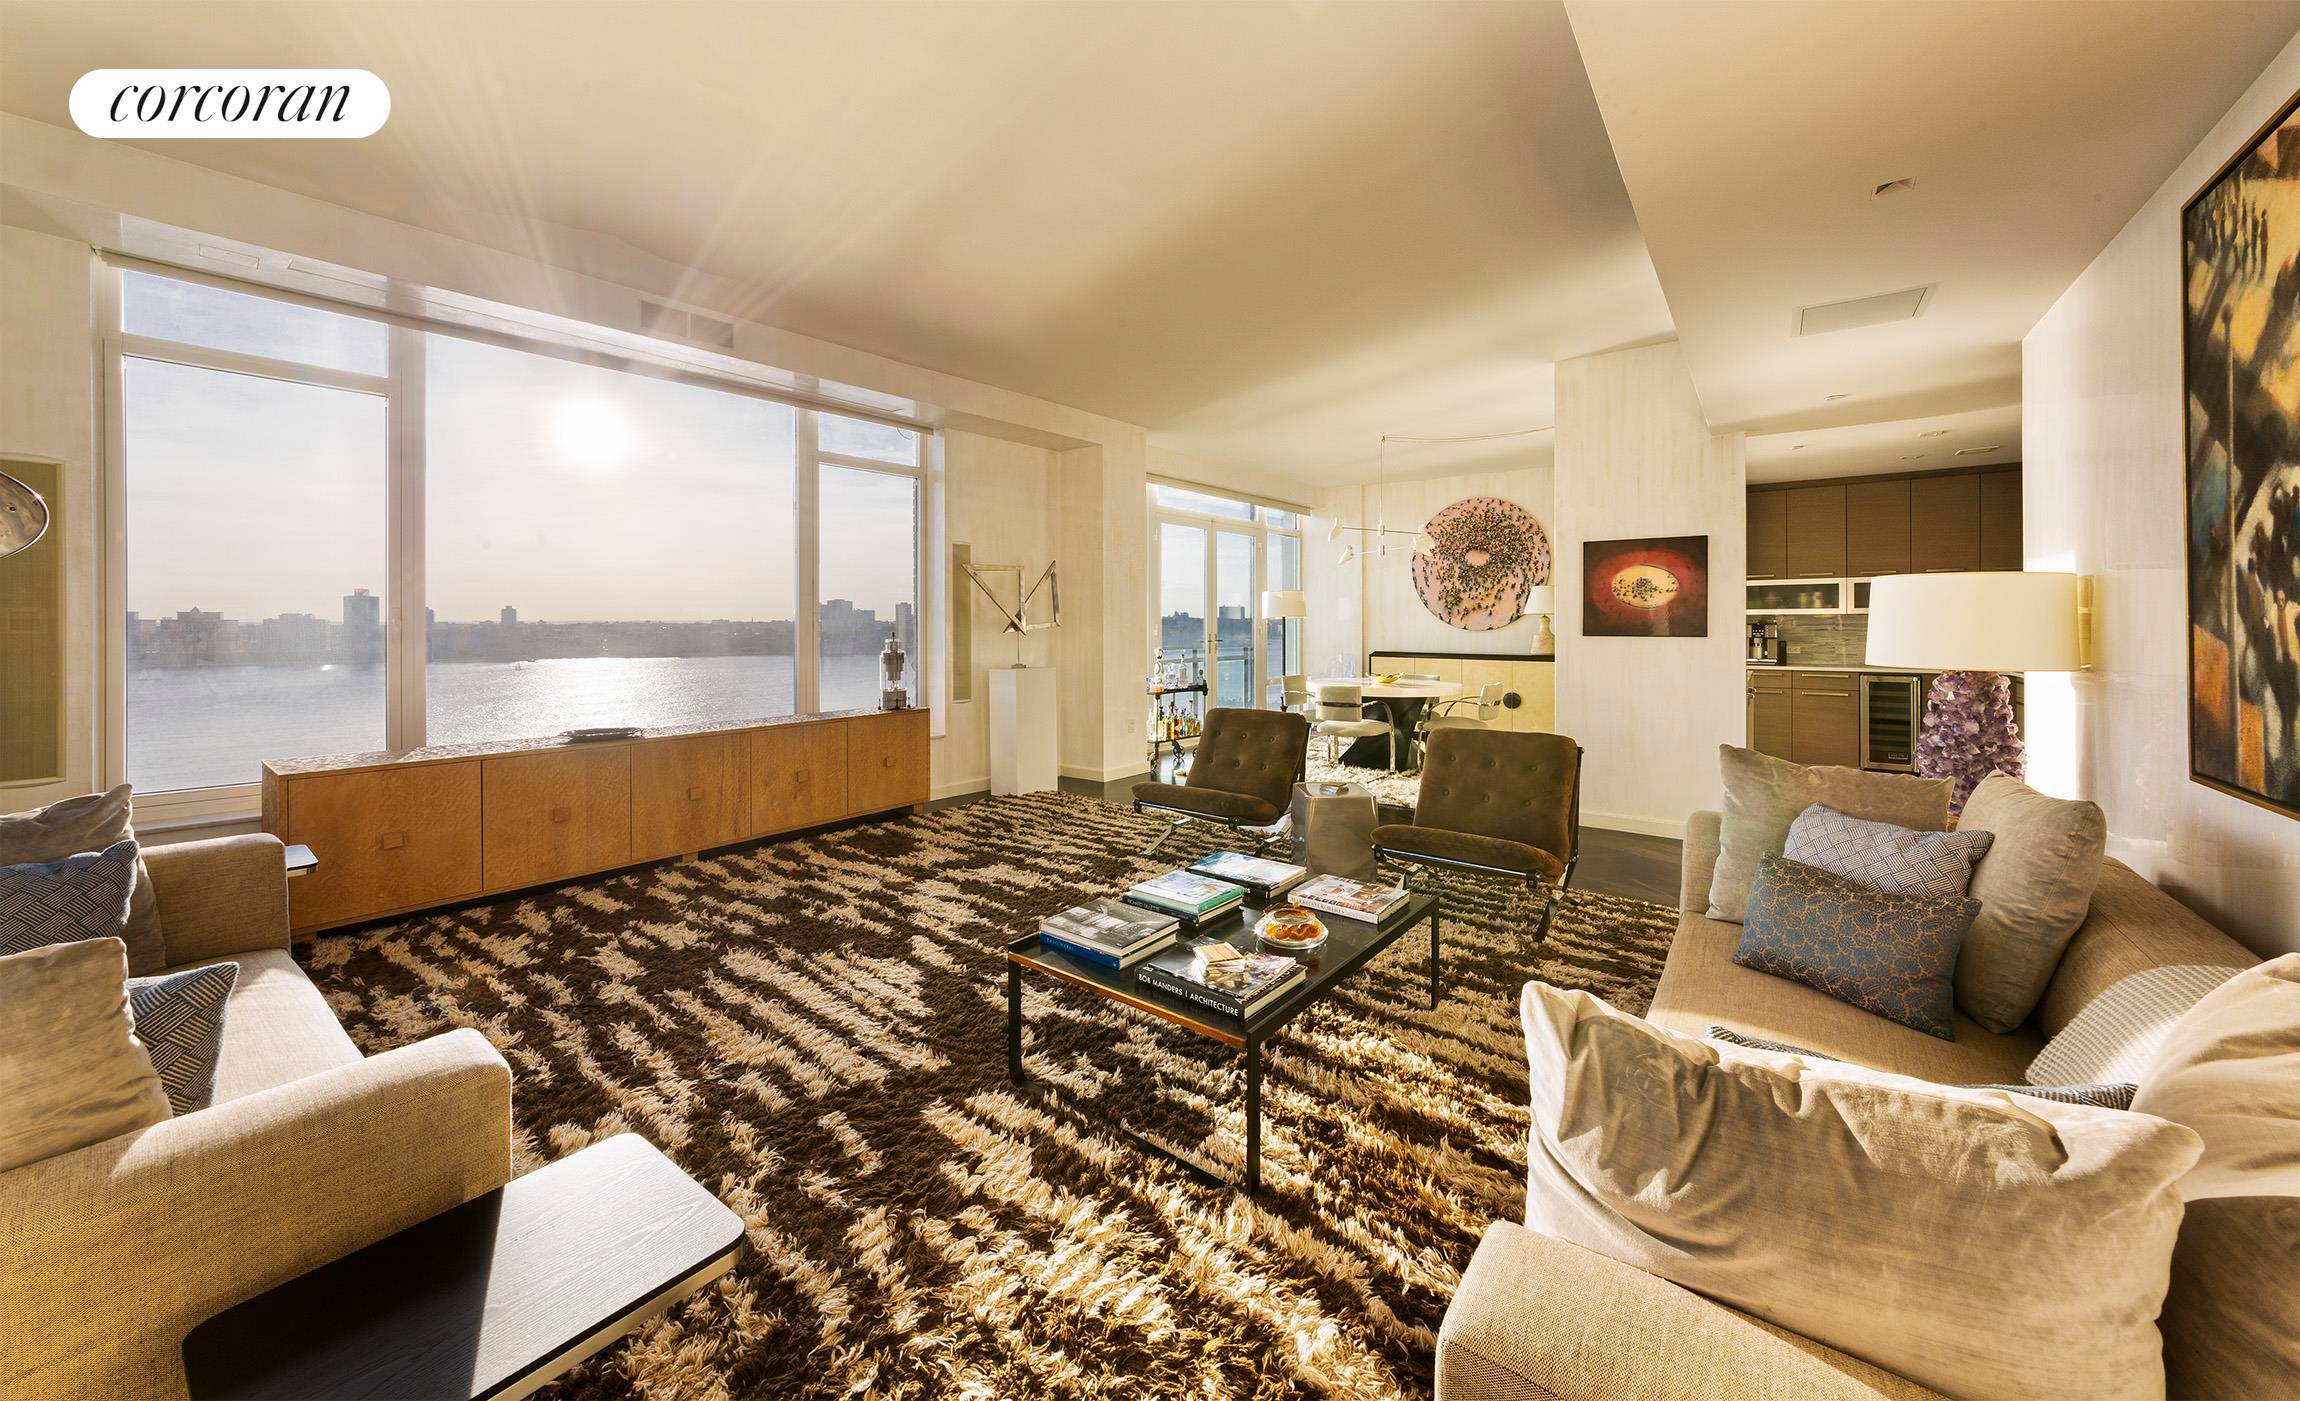 Superior West Village 3 bedroom condo with direct Hudson River views.